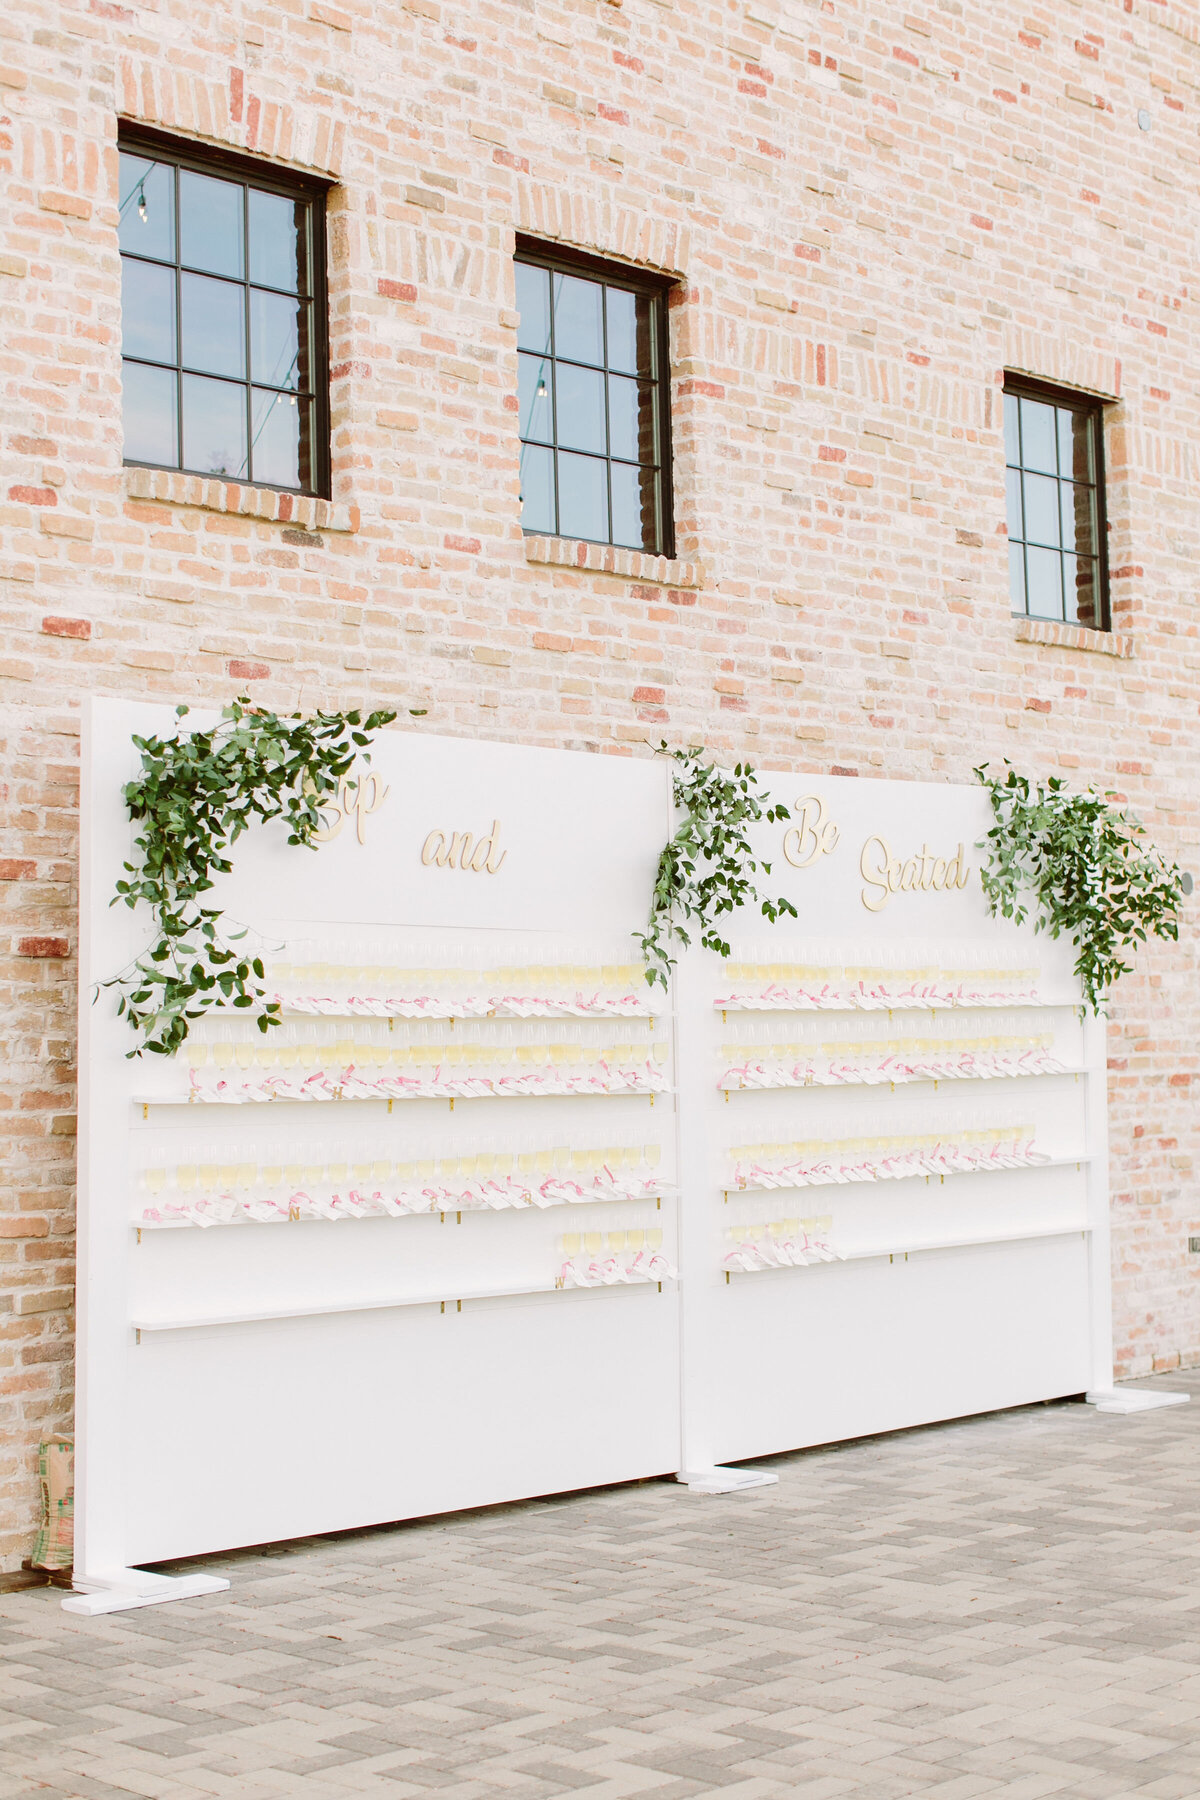 Large white wedding reception champagne backdrop display decorated with greenery against a brick wall